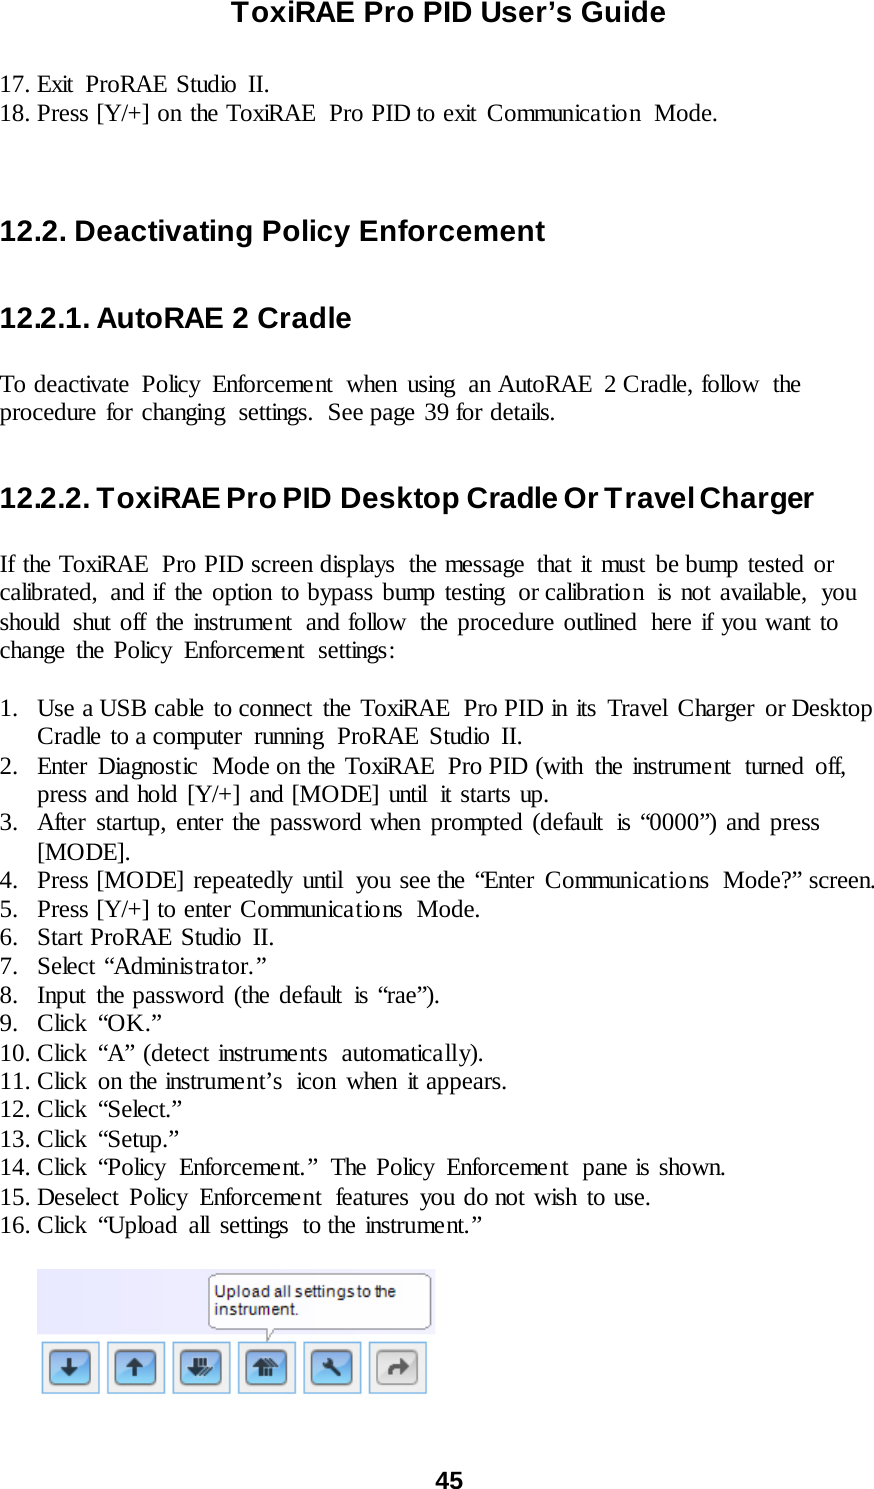 ToxiRAE Pro PID User’s Guide  45   17. Exit ProRAE Studio II. 18. Press [Y/+] on the ToxiRAE  Pro PID to exit Communication  Mode.    12.2. Deactivating Policy Enforcement  12.2.1. AutoRAE 2 Cradle  To deactivate Policy Enforcement when using an AutoRAE 2 Cradle, follow the procedure for changing  settings.  See page 39 for details.  12.2.2. ToxiRAE Pro PID Desktop Cradle Or Travel Charger  If the ToxiRAE  Pro PID screen displays  the message that it must be bump tested or calibrated, and if the option to bypass bump testing  or calibration  is not available,  you should shut off the instrument  and follow  the procedure outlined  here if you want to change the Policy Enforcement  settings:  1. Use a USB cable to connect  the ToxiRAE  Pro PID in its Travel Charger or Desktop Cradle to a computer  running  ProRAE  Studio  II. 2. Enter  Diagnostic  Mode on the ToxiRAE  Pro PID (with the instrument  turned off, press and hold [Y/+] and [MODE] until  it starts up. 3. After startup, enter the password when prompted (default  is “0000”) and press [MODE]. 4. Press [MODE] repeatedly until  you see the “Enter Communications  Mode?” screen. 5. Press [Y/+] to enter Communications  Mode. 6. Start ProRAE Studio II. 7. Select “Administrator.” 8. Input the password (the default is “rae”). 9. Click “OK.” 10. Click “A” (detect instruments  automatically). 11. Click on the instrument’s  icon when it appears. 12. Click “Select.” 13. Click “Setup.” 14. Click “Policy Enforcement.” The Policy Enforcement pane is shown. 15. Deselect Policy Enforcement  features you do not wish to use. 16. Click “Upload all settings to the instrume nt. ”           